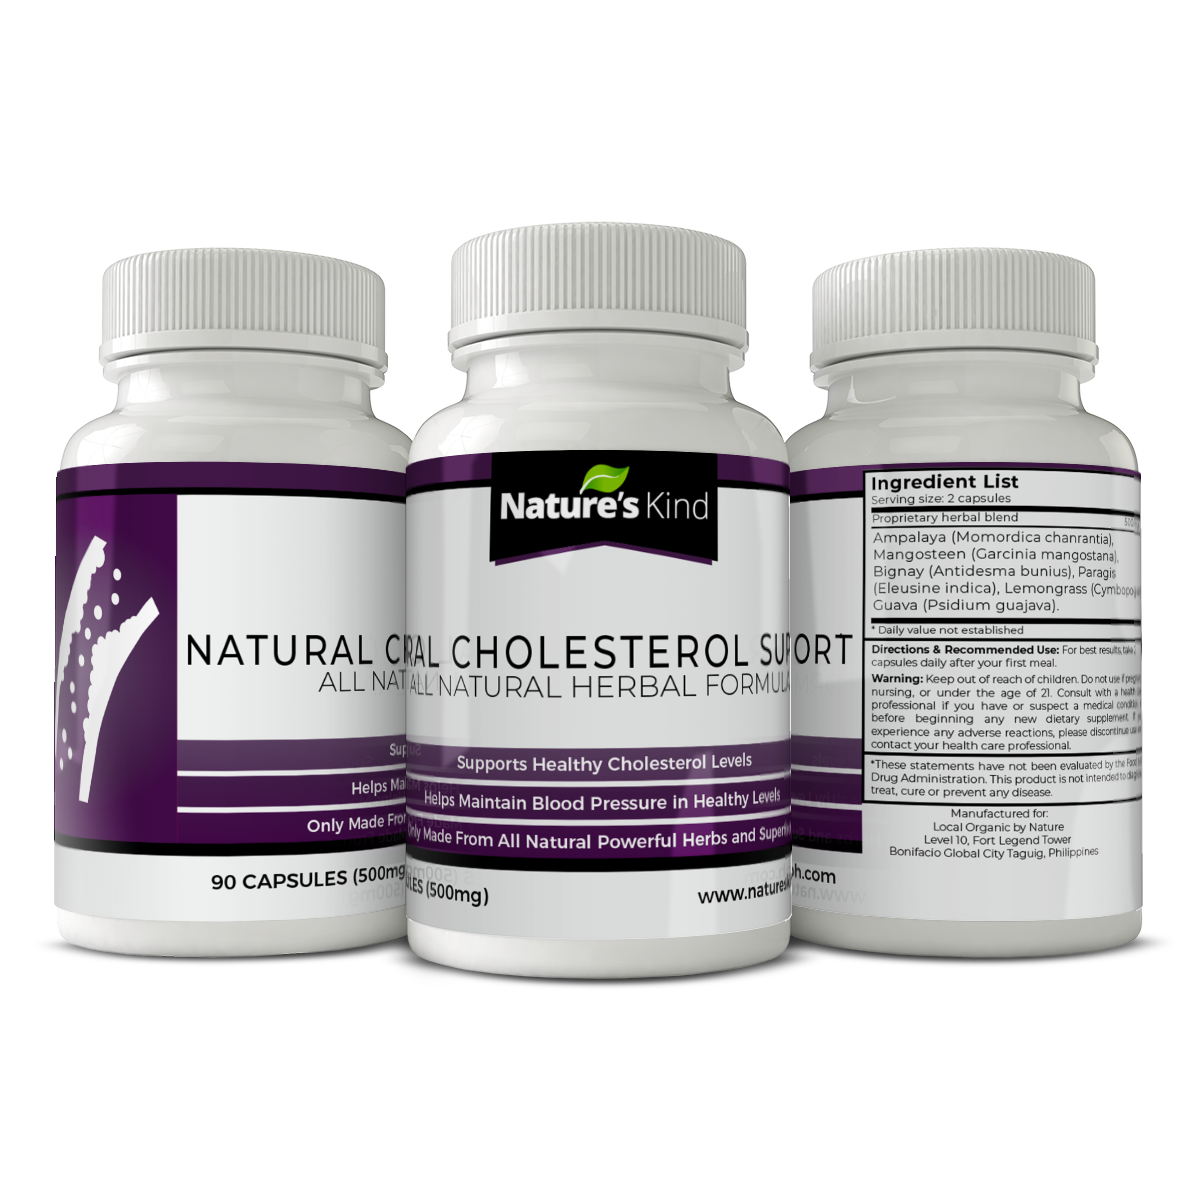 Cholesterol Support Supplement - with 6 Best HERBS for Heart Support